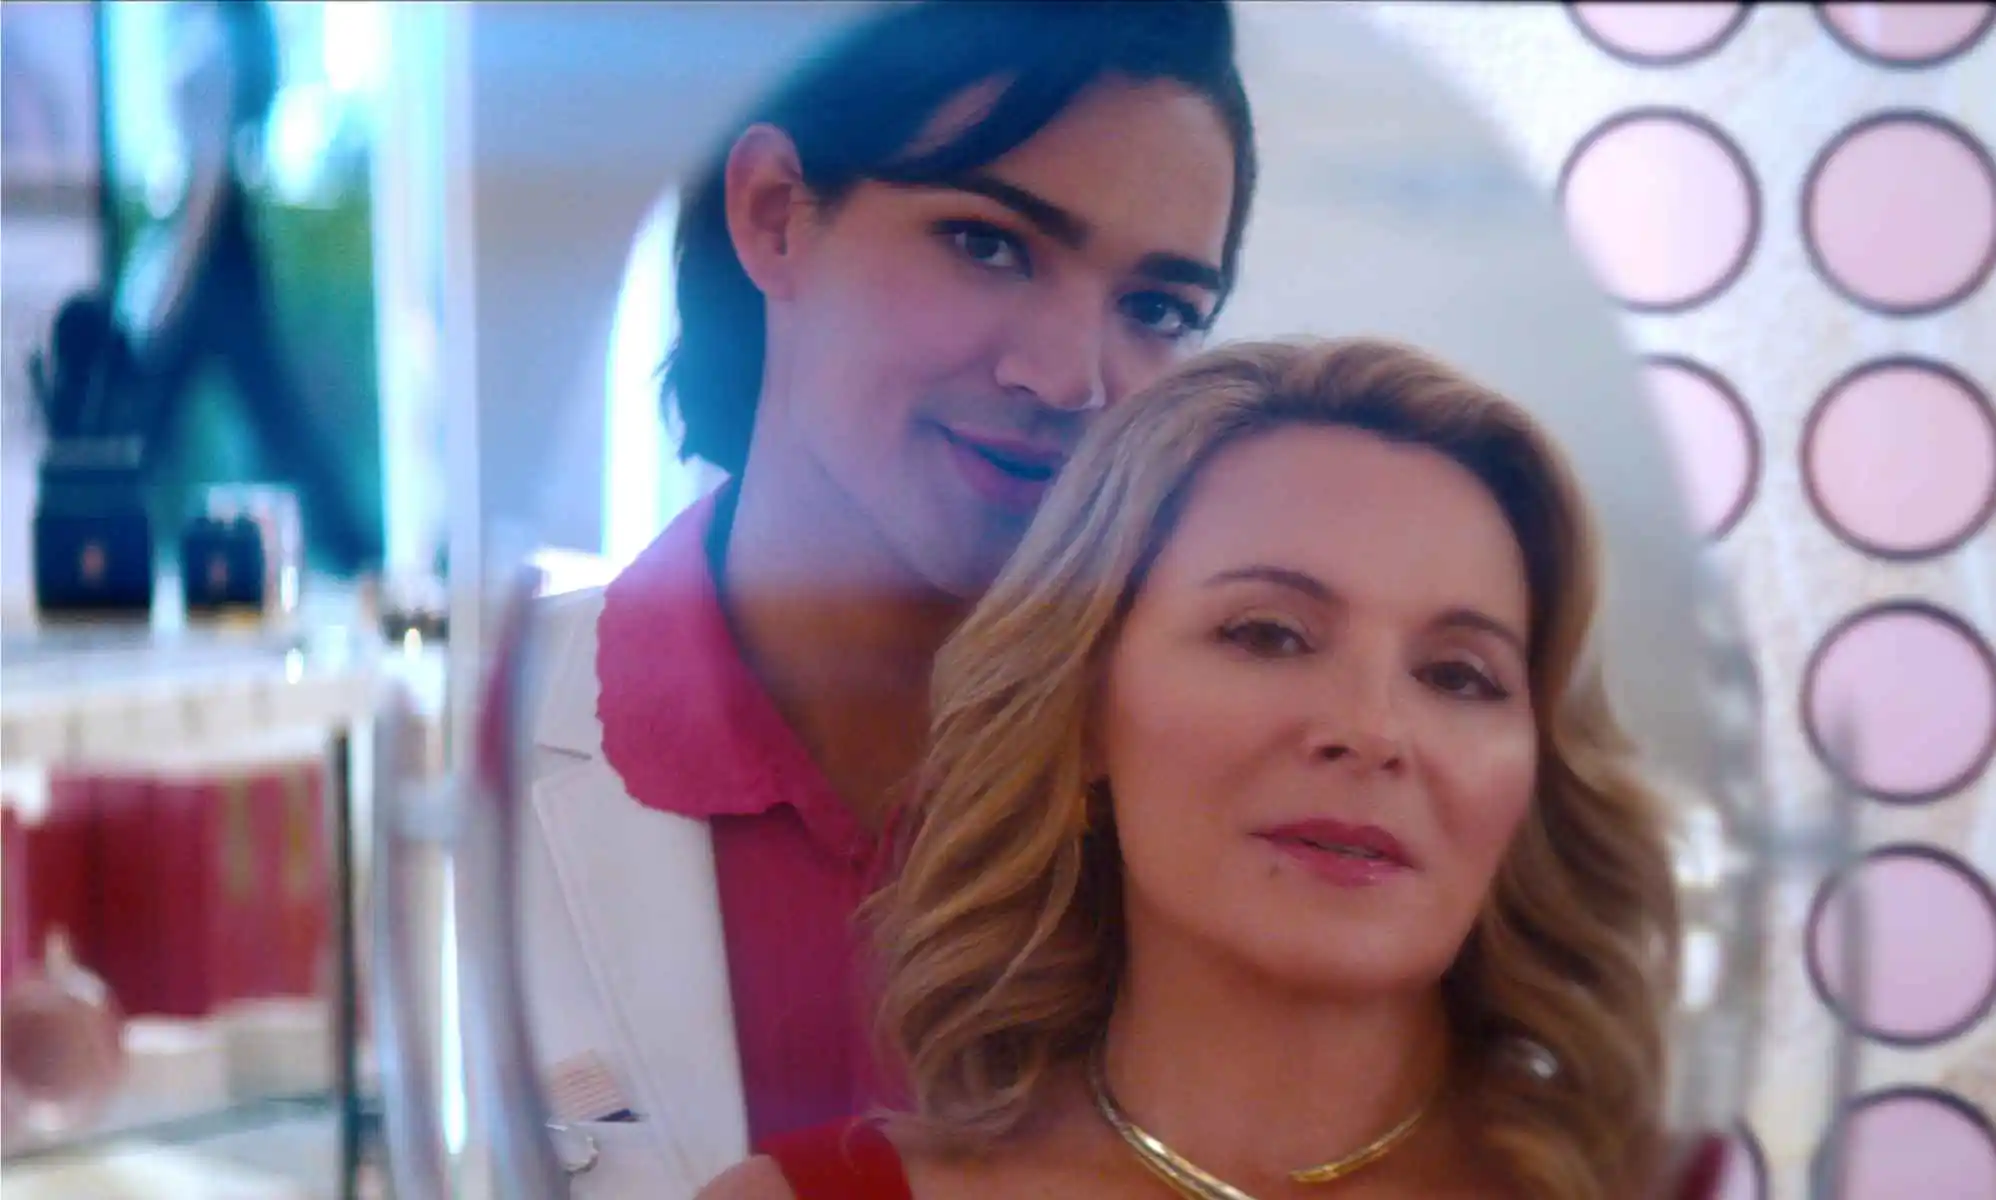 Glamorous: Kim Cattrall's new Netflix series gets Pride release date